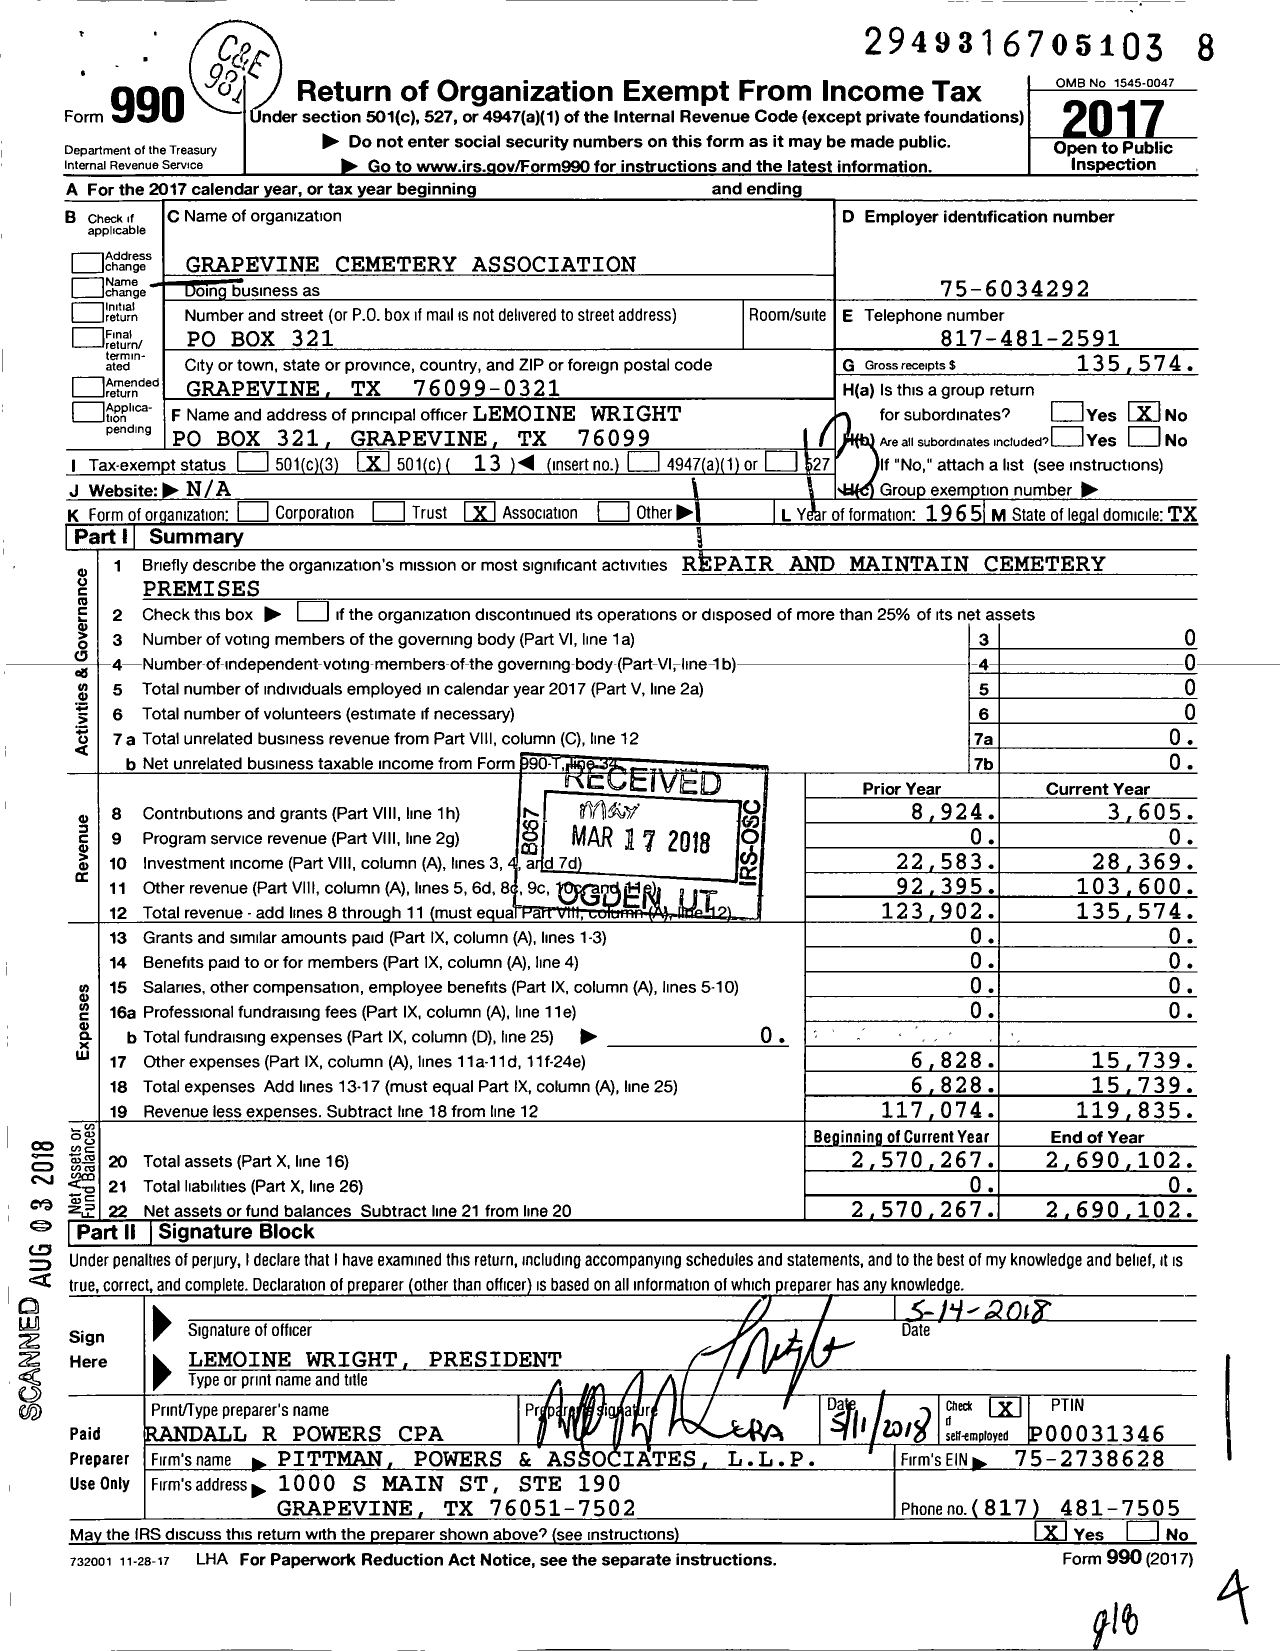 Image of first page of 2017 Form 990O for Grapevine Cemetery Association